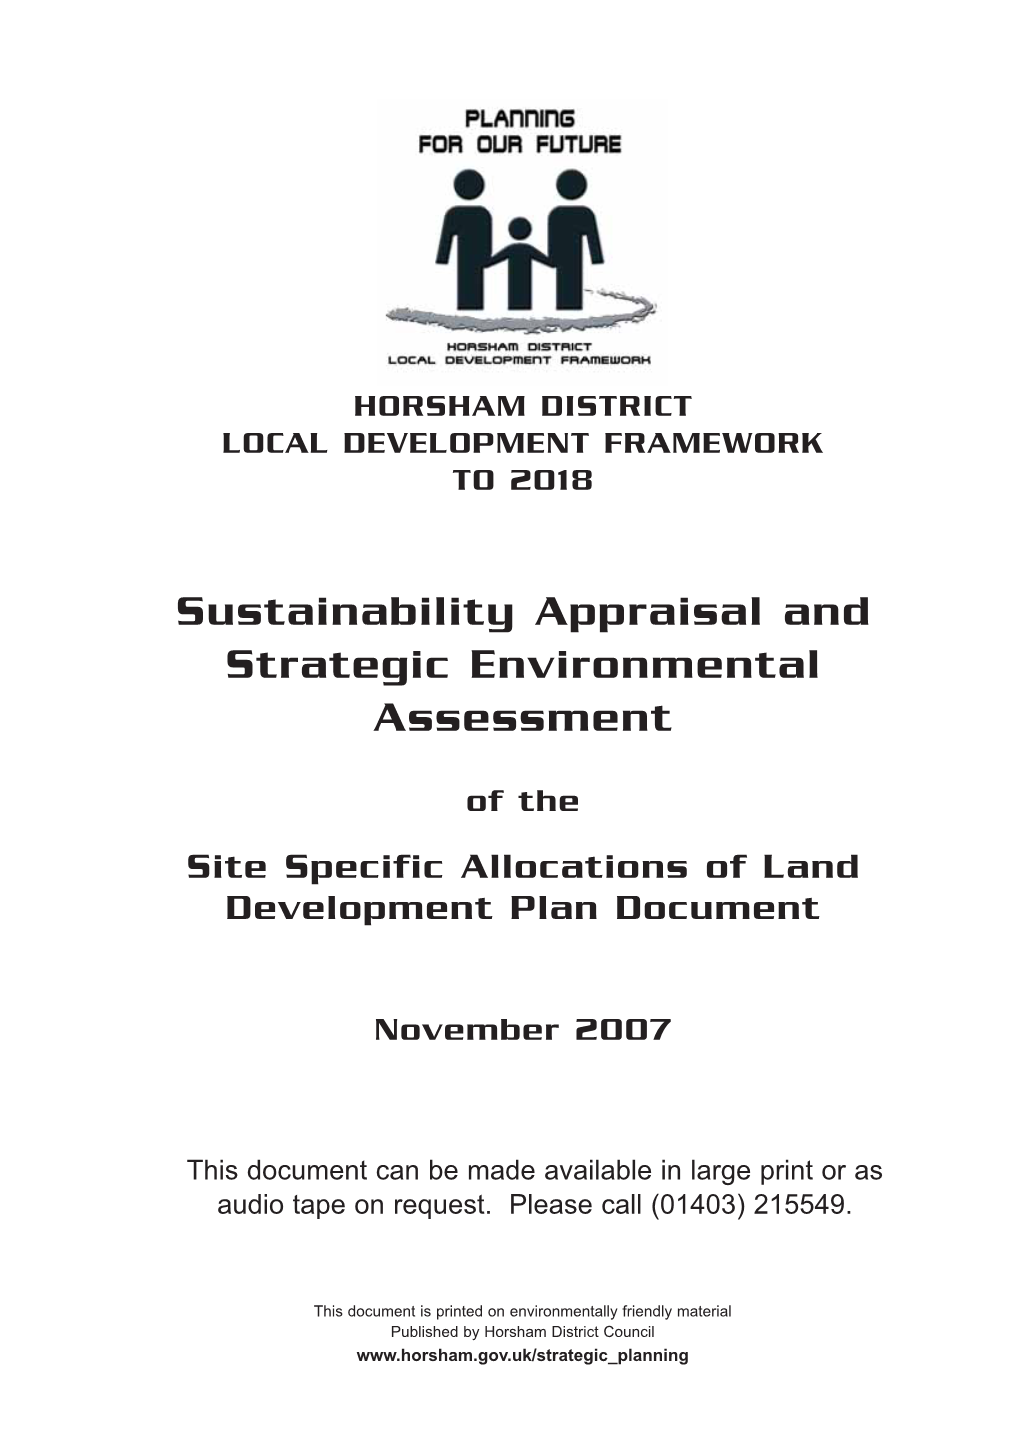 Sustainability Appraisal and Strategic Environmental Assessment